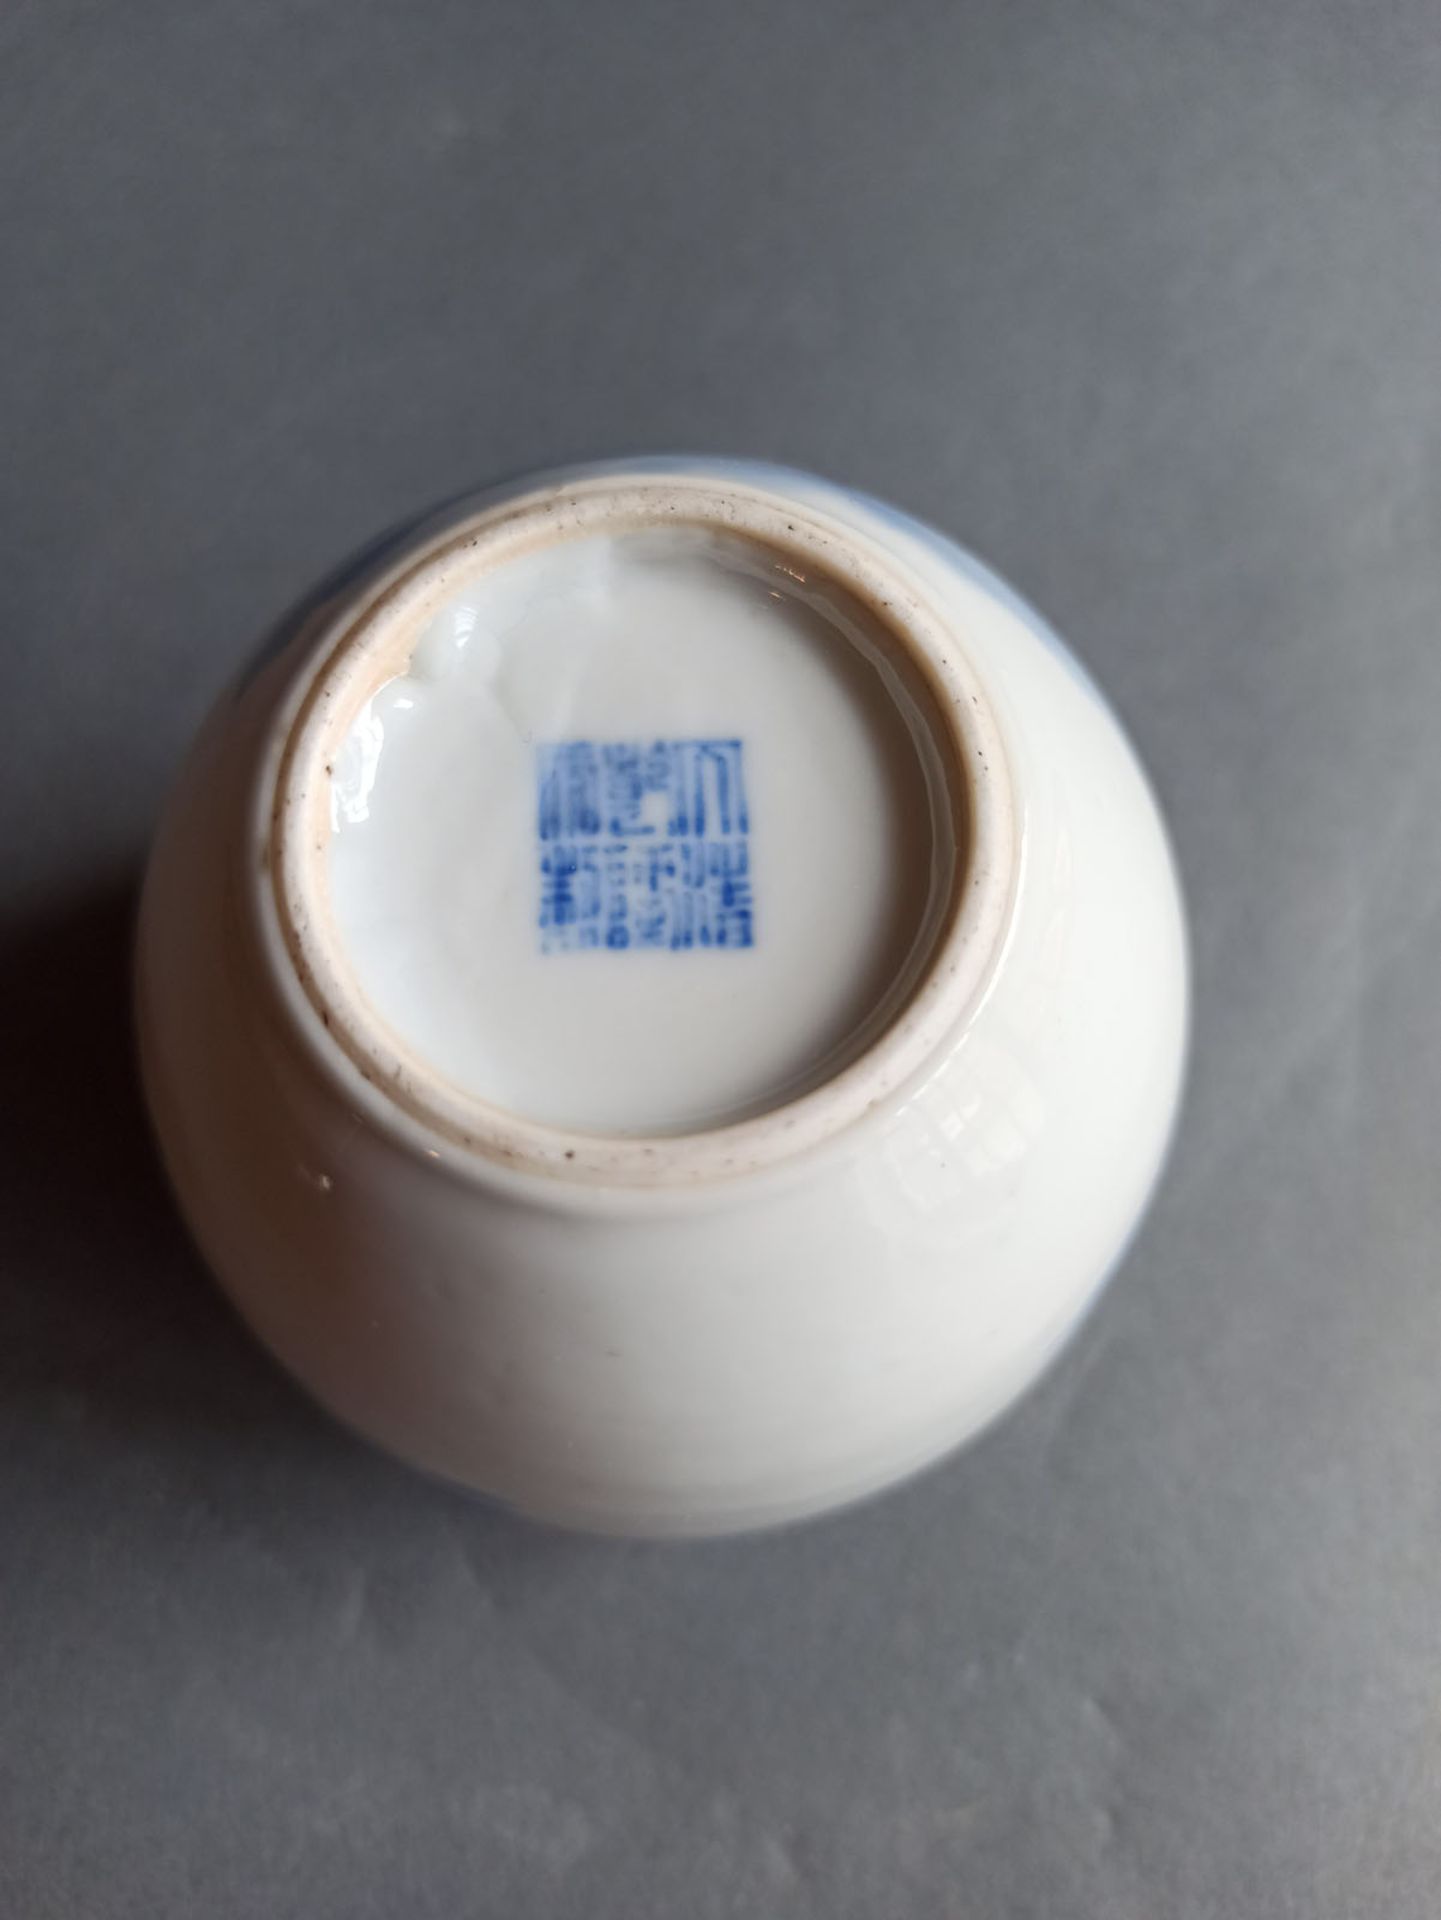 A GLOBULAR BLUE AND WHITE PORCELAIN WITH SCHIOLARS LOOKING AT A CALLIGRAPHY - Image 7 of 7